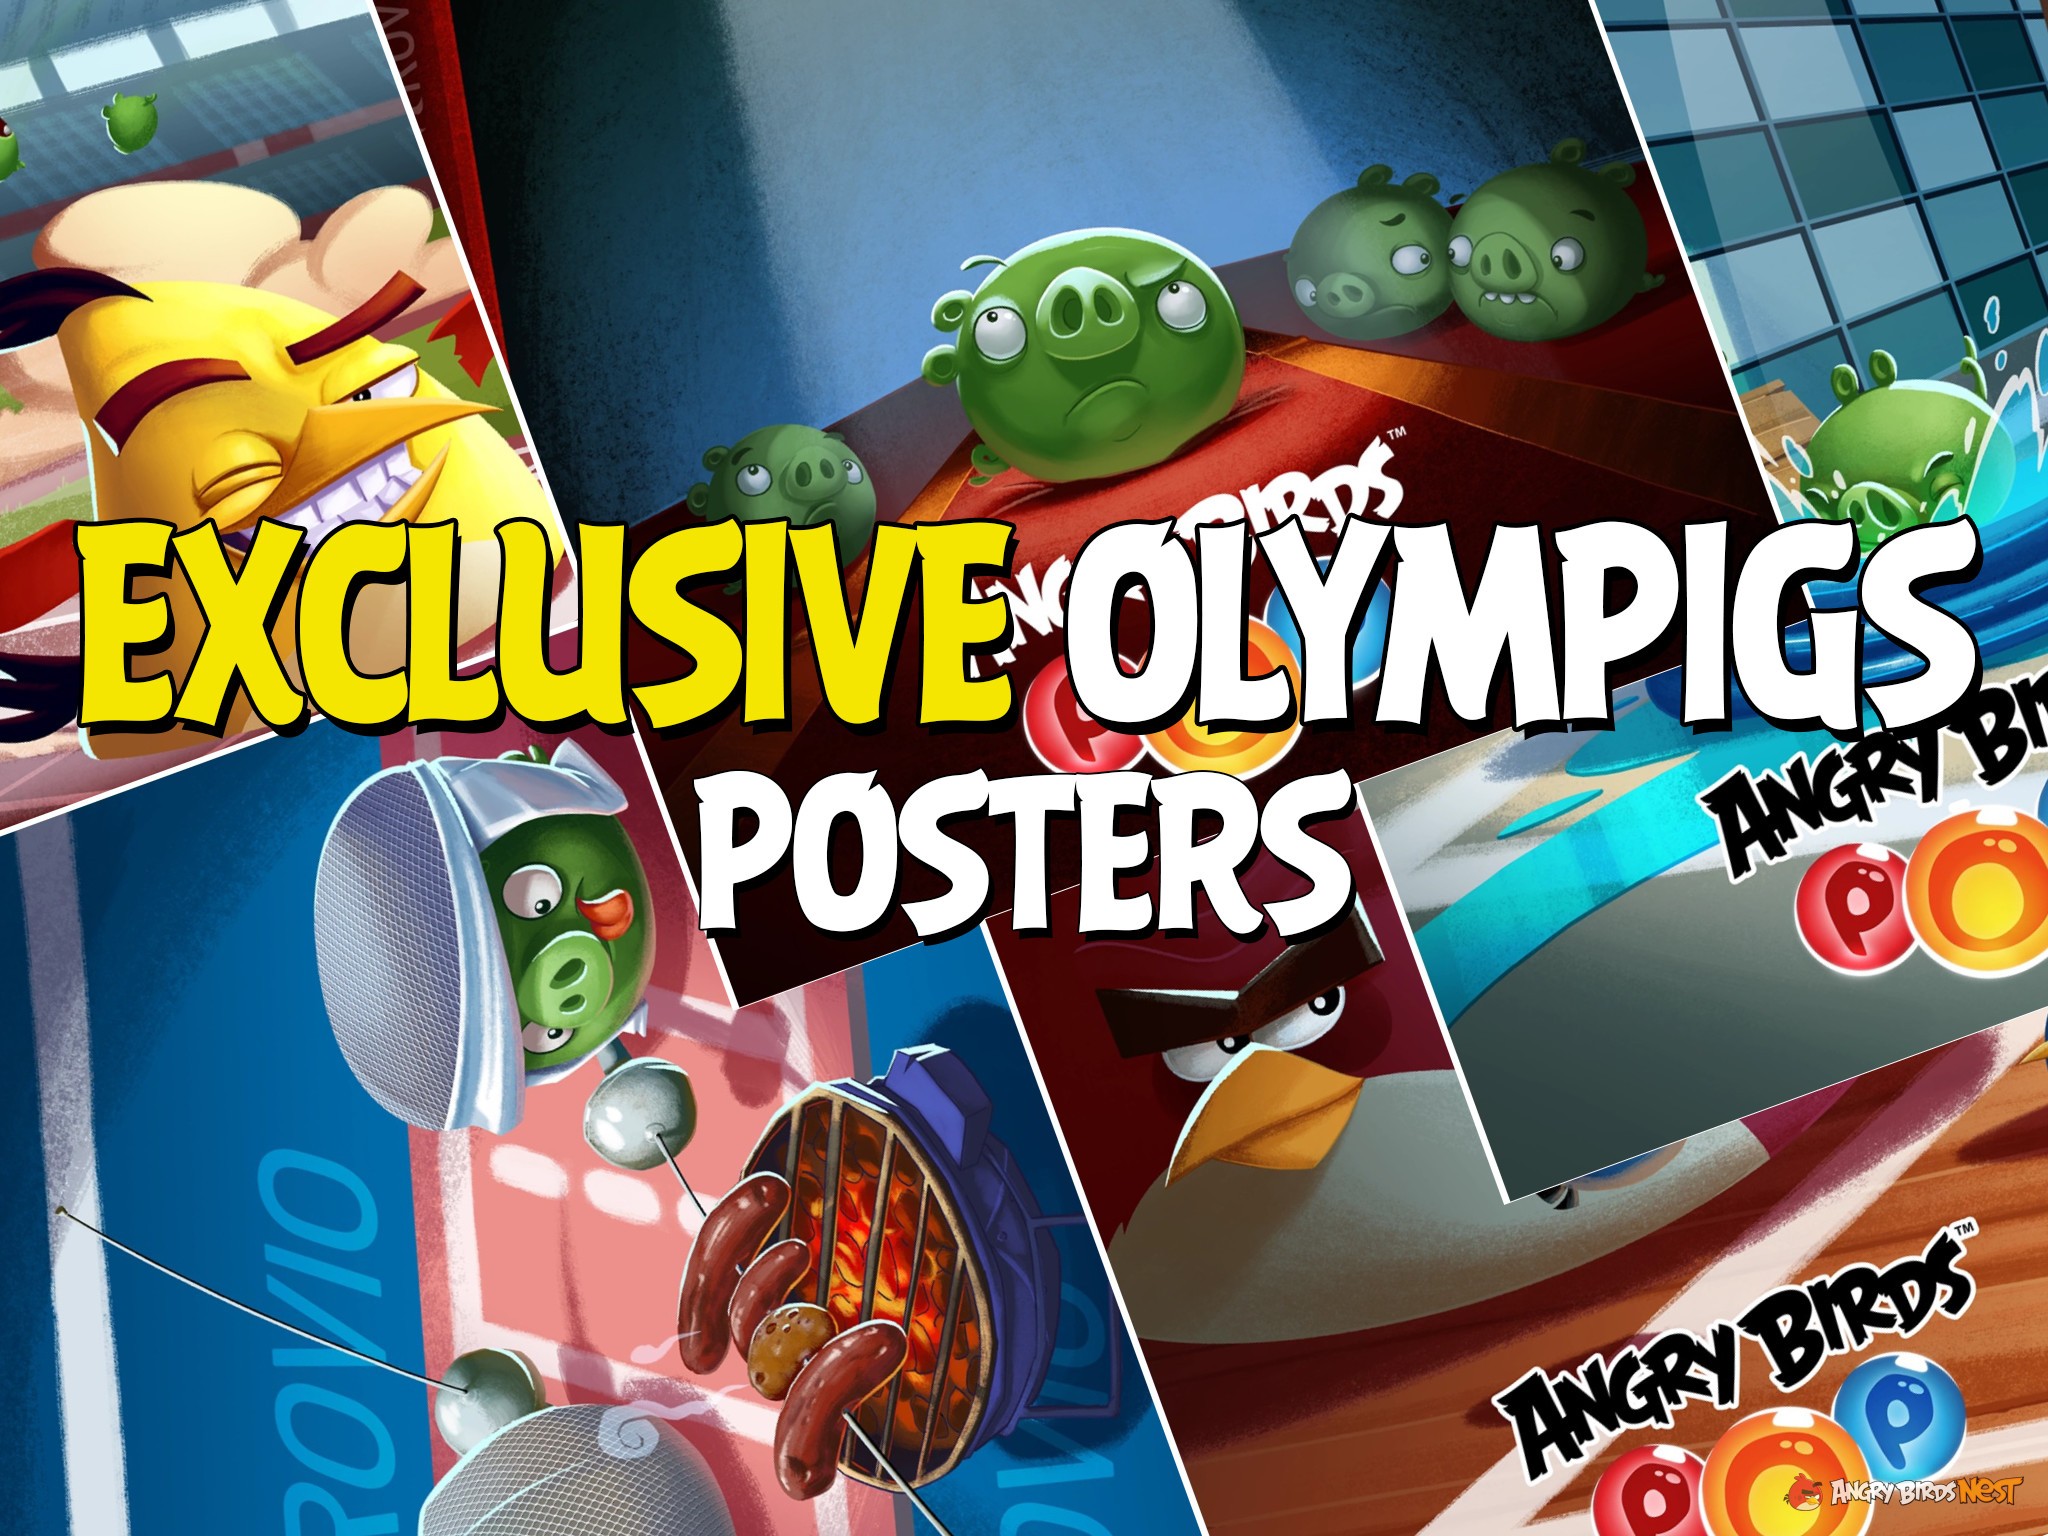 Angry Birds Pop Exclusive Olympigs Posters